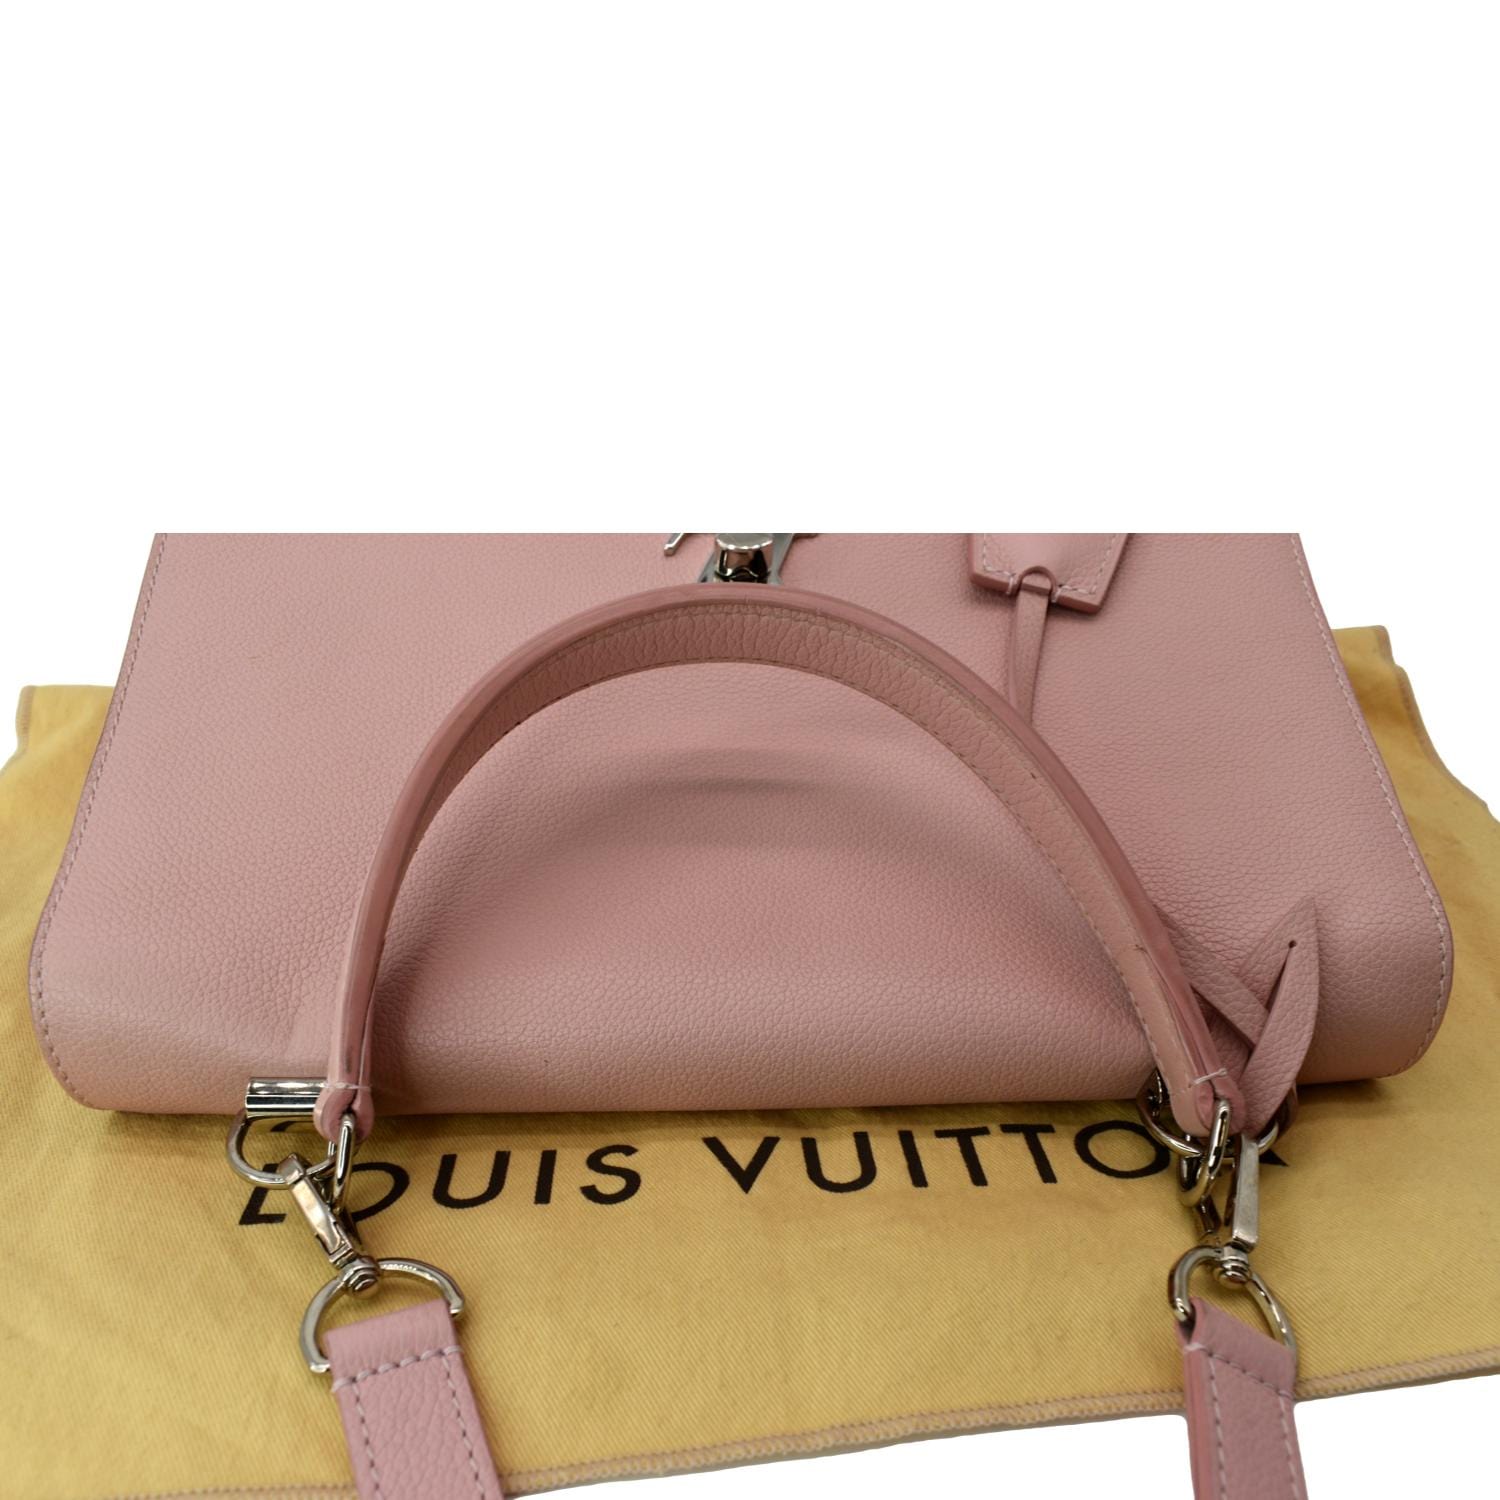 Louis Vuitton Lockme Perforated Leather Backpack Pink Limited Edition 2017